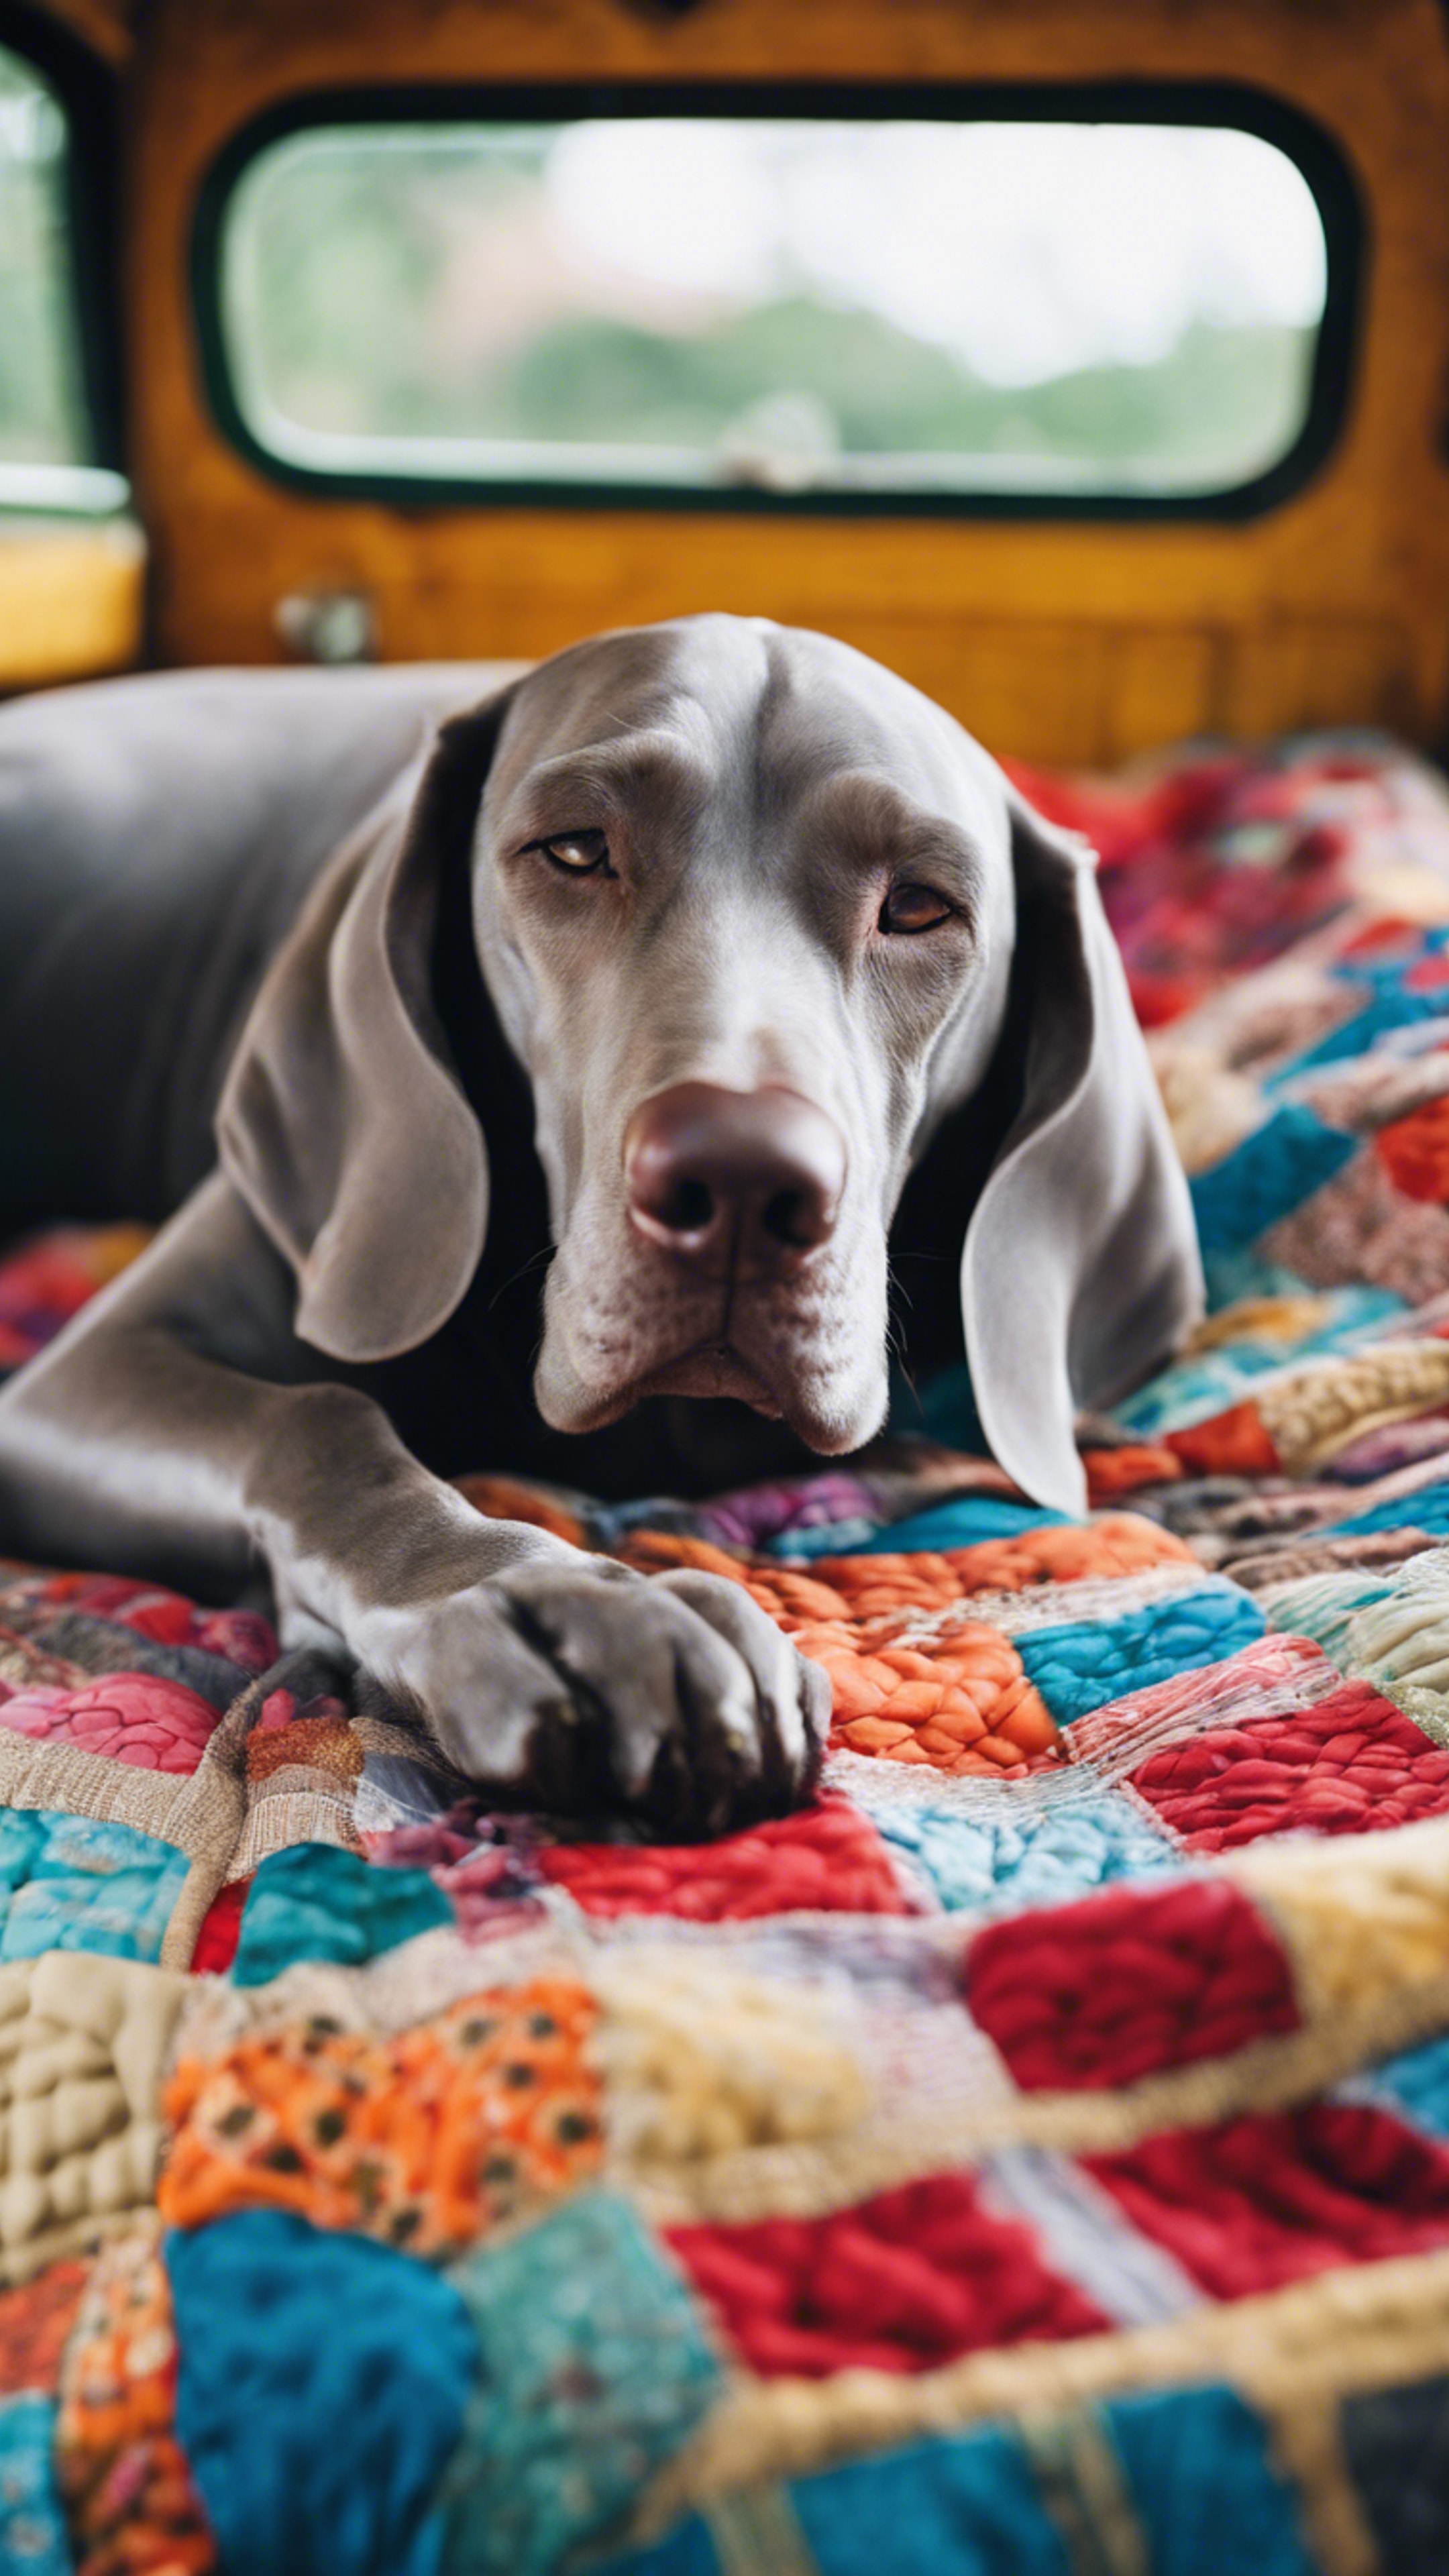 A sleepy Weimaraner lying in the back of a vintage truck bed, covered with a colorful patchwork quilt. Hintergrund[392368d8c78049ac8a4f]